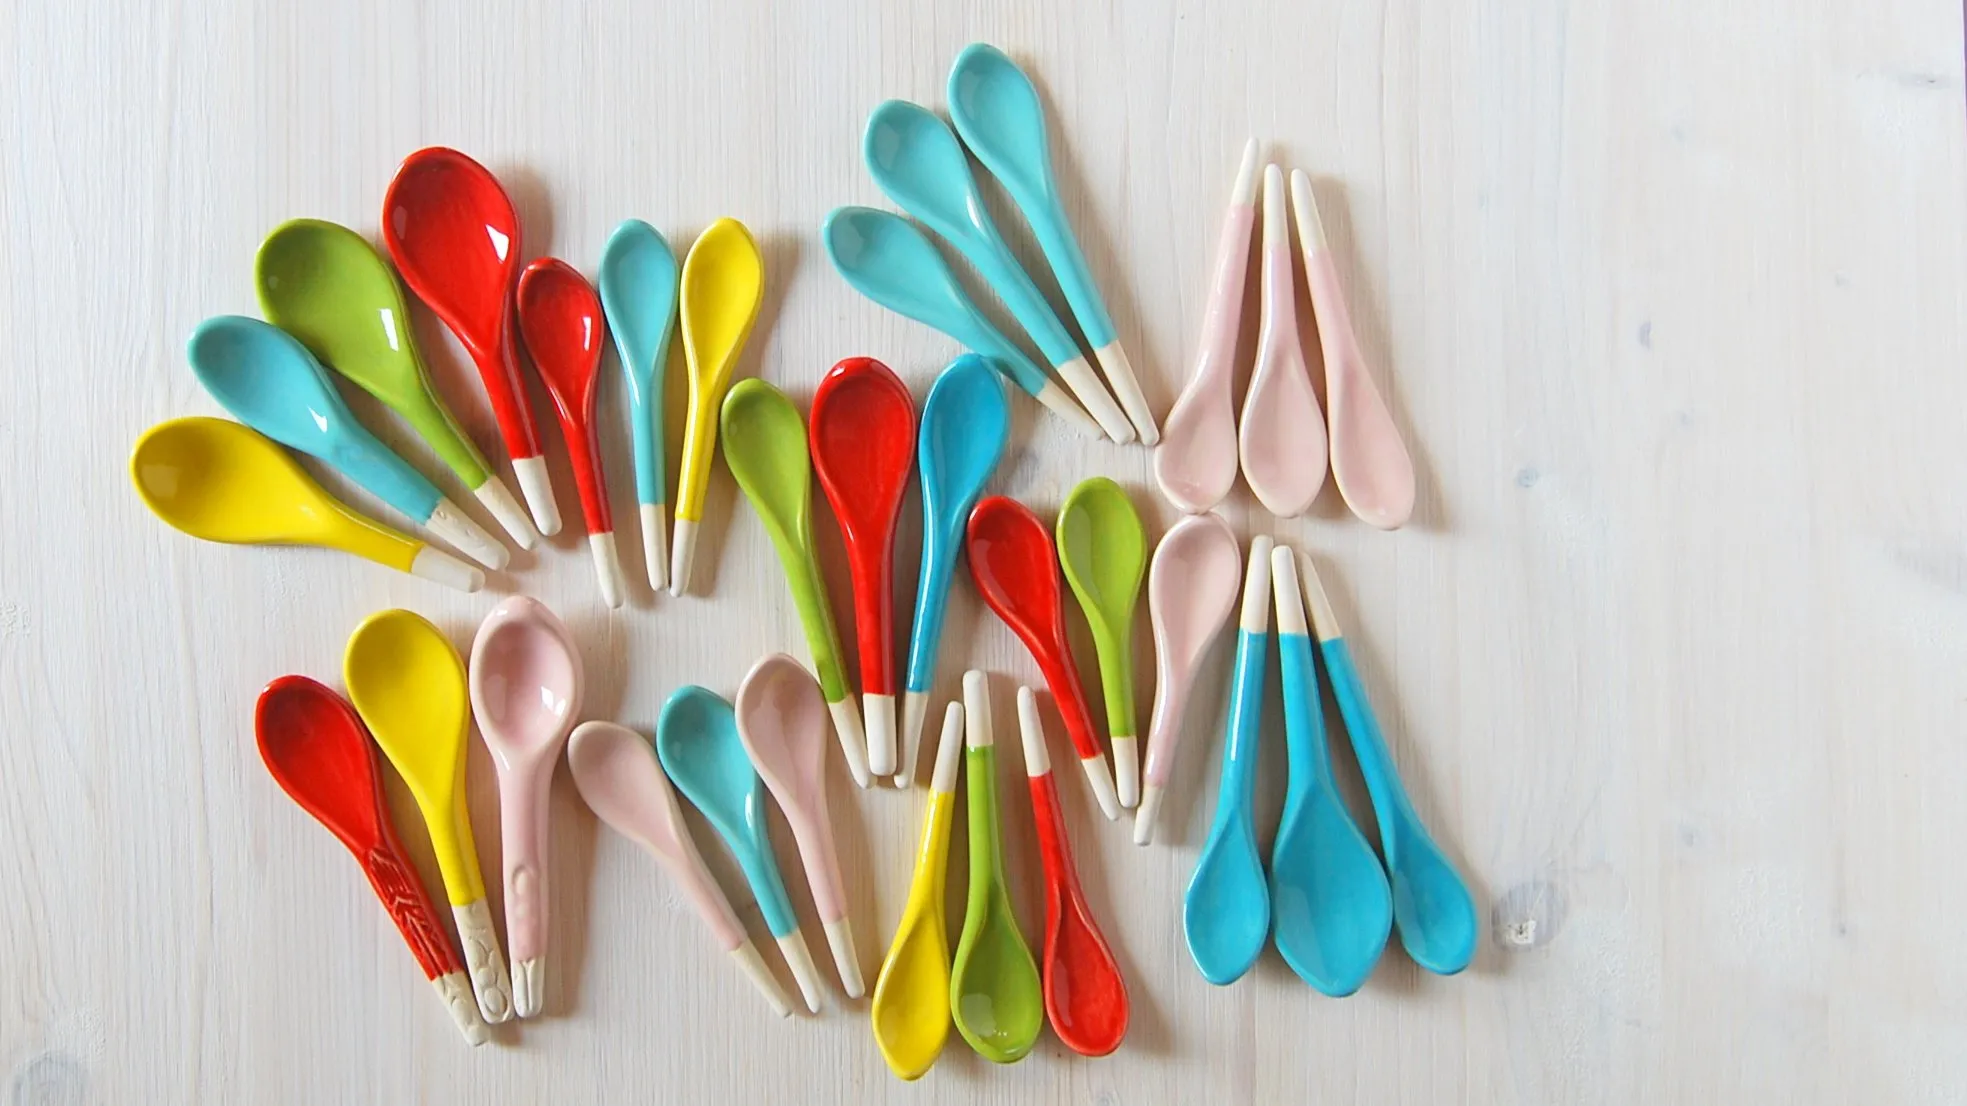 How to make ceramic spoons